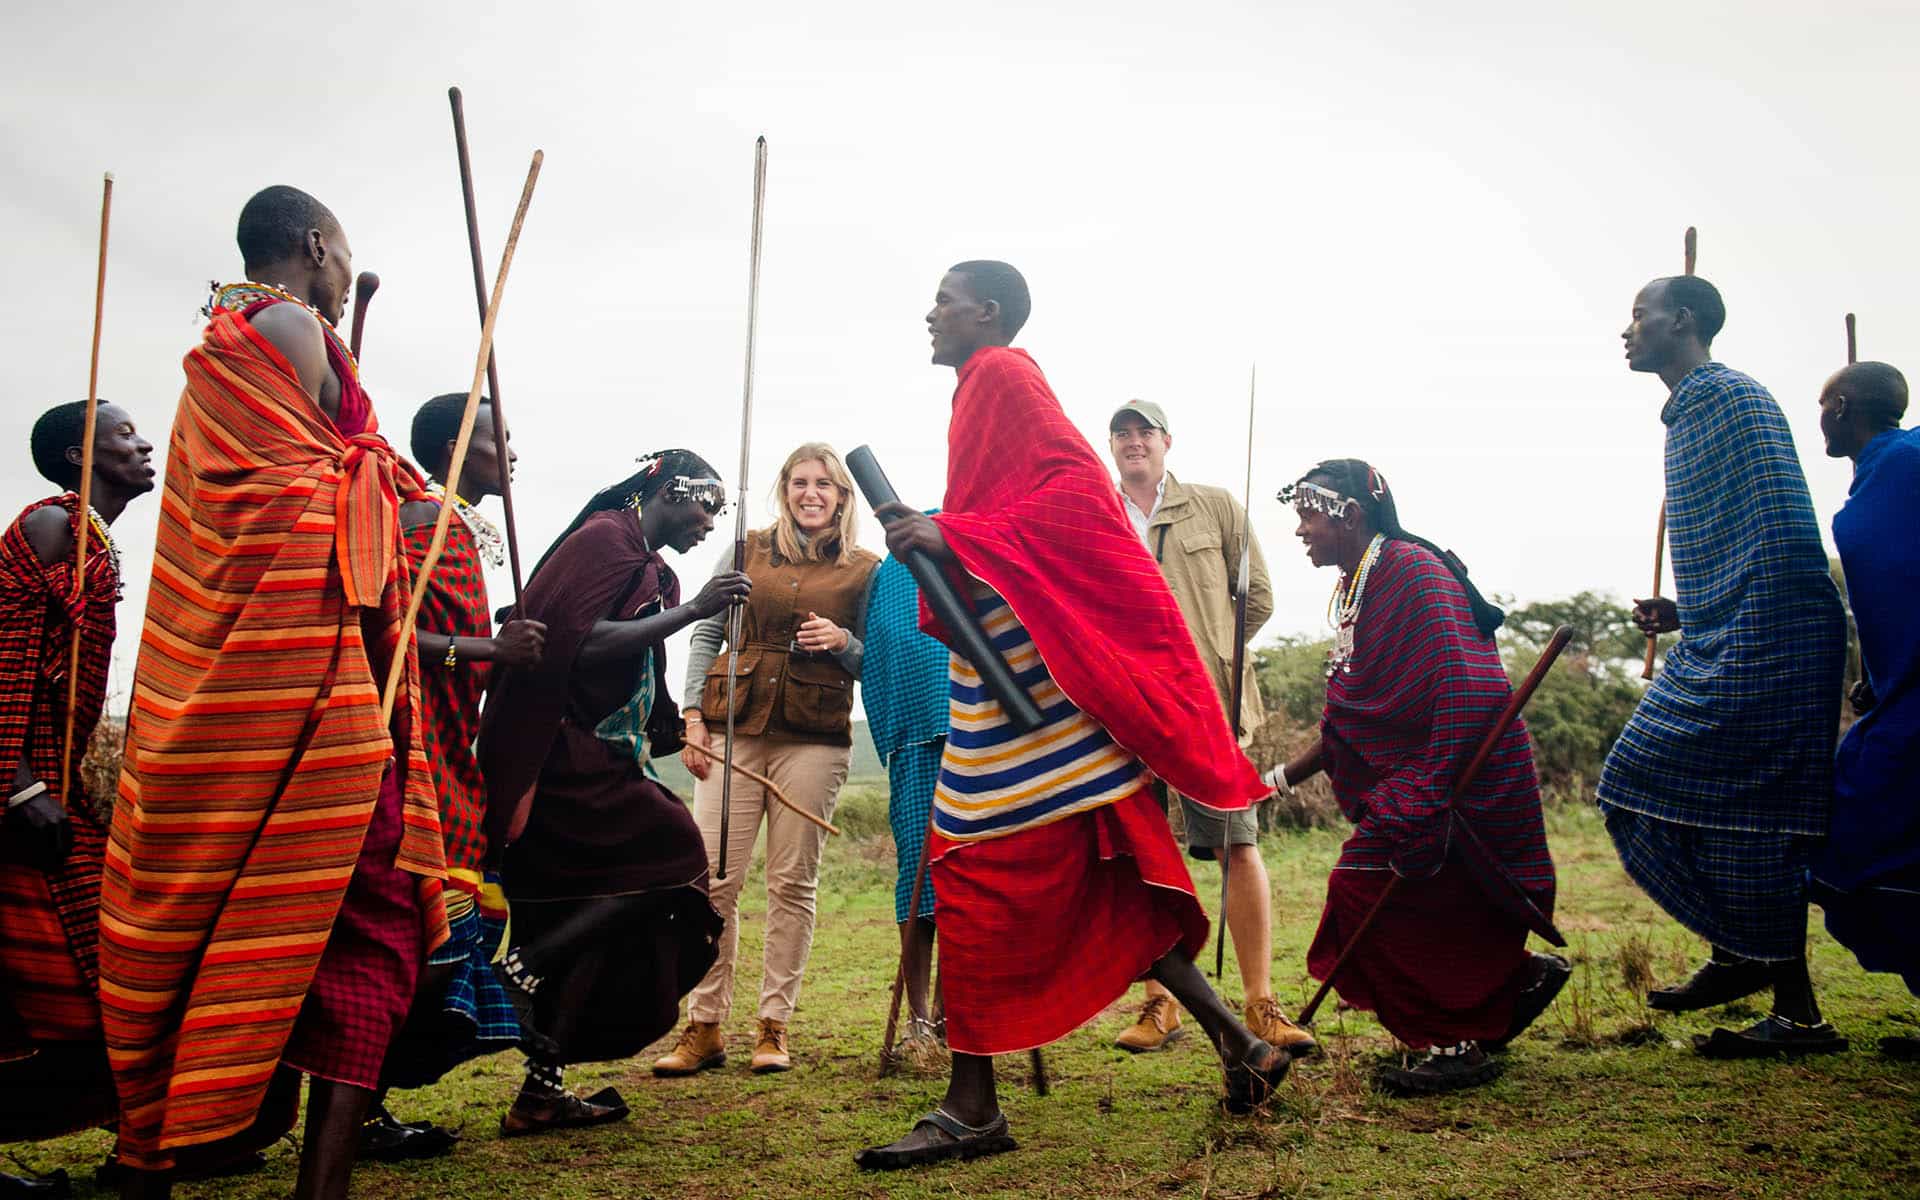 Group of Maasai people dancing with two travelers.